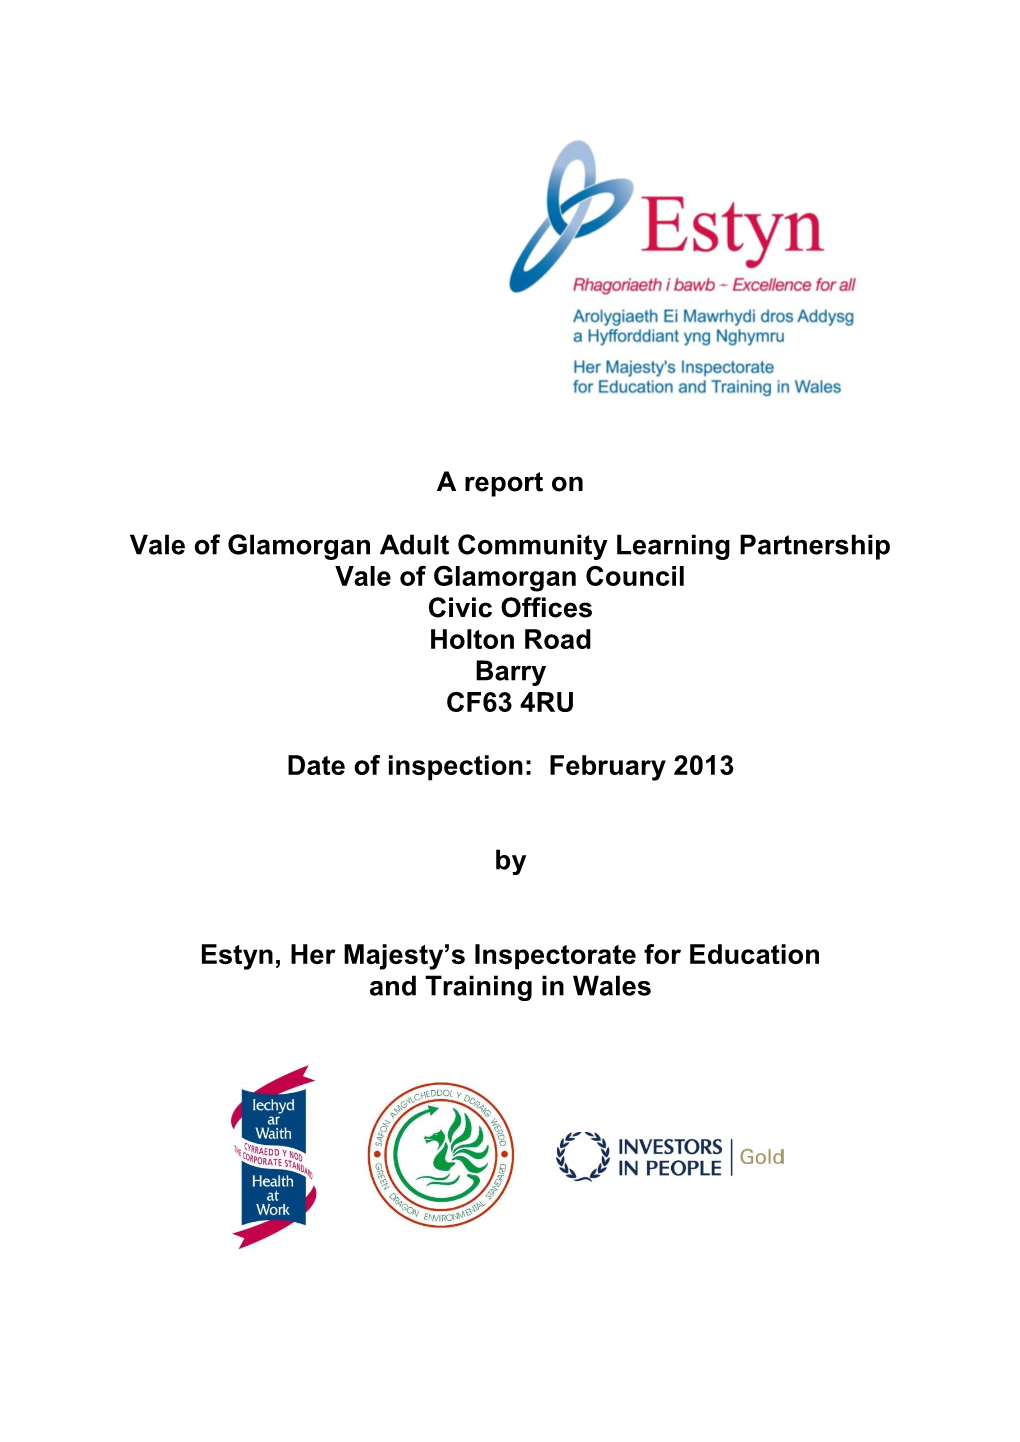 A Report on Vale of Glamorgan Adult Community Learning Partnership February 2013